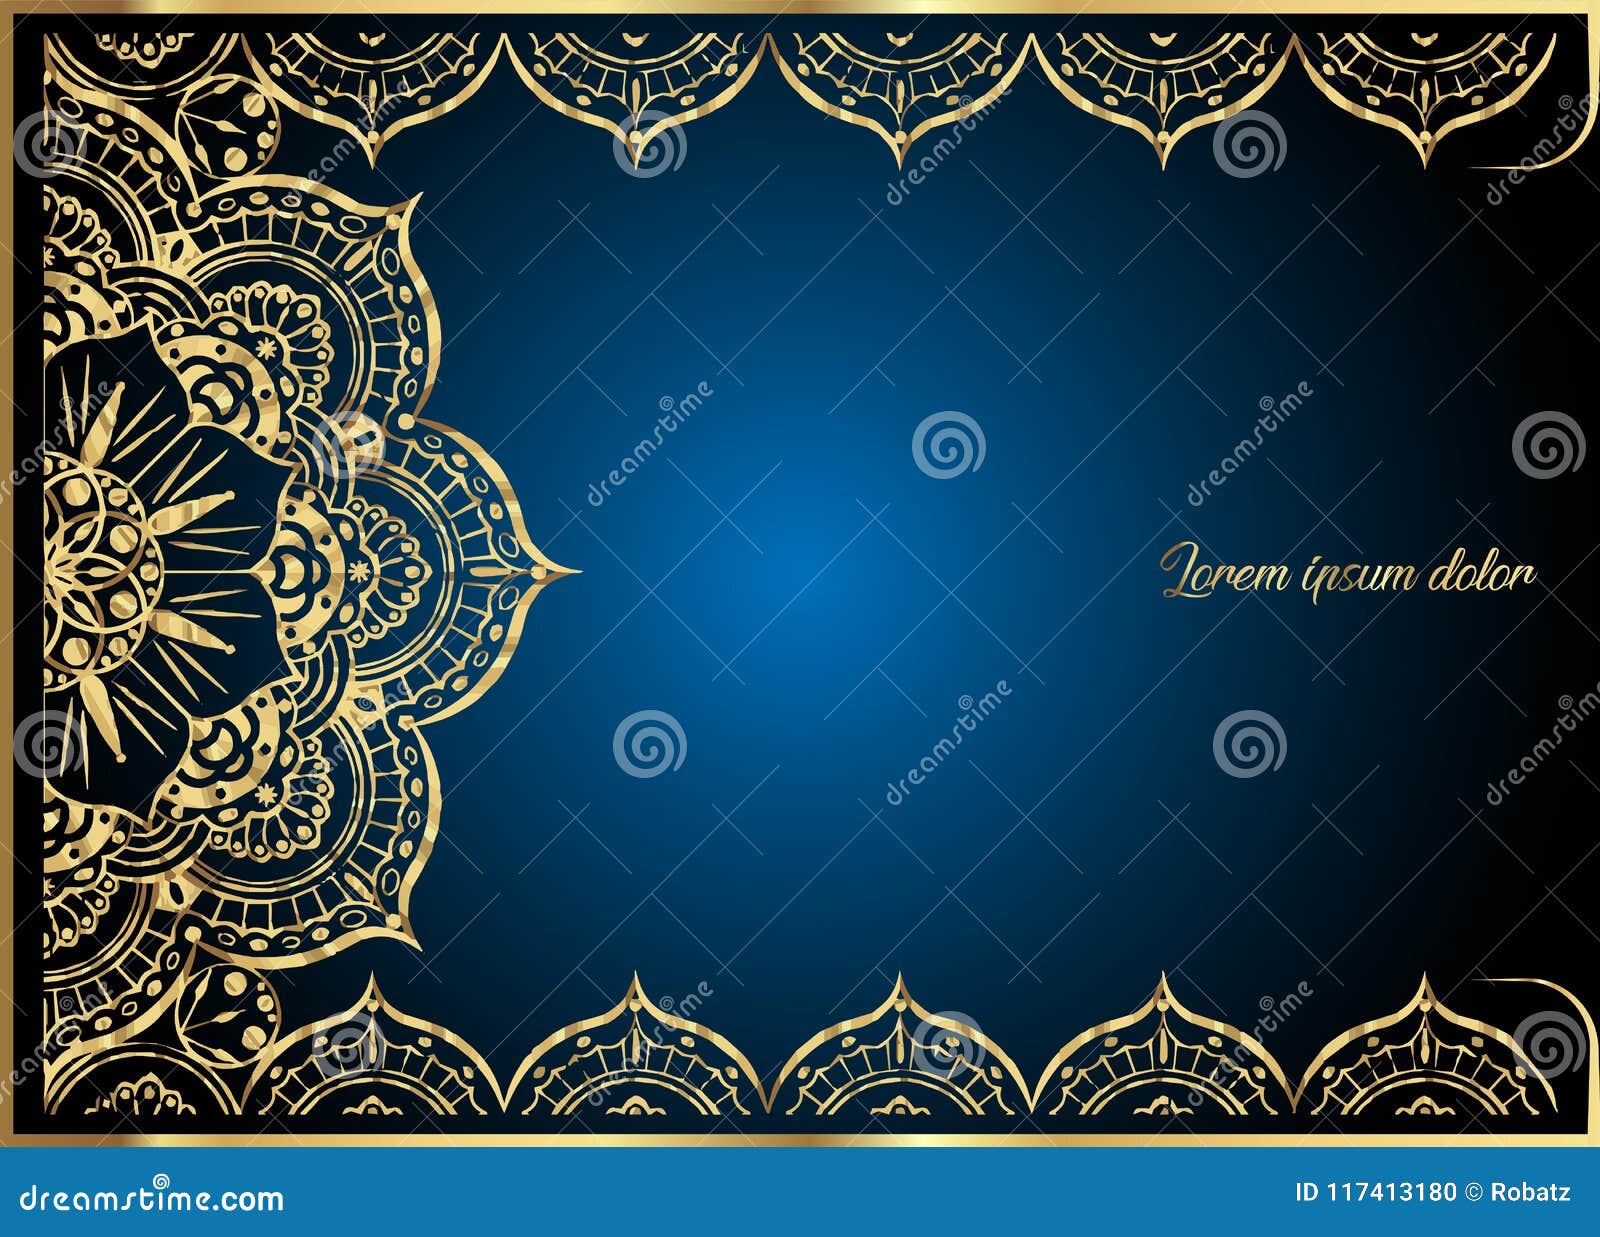 Gold Vintage Greeting Card on Blue Background. Luxury Ornament Template.  Great for Invitation, Flyer, Menu, Brochure Stock Vector - Illustration of  card, decoration: 117413180